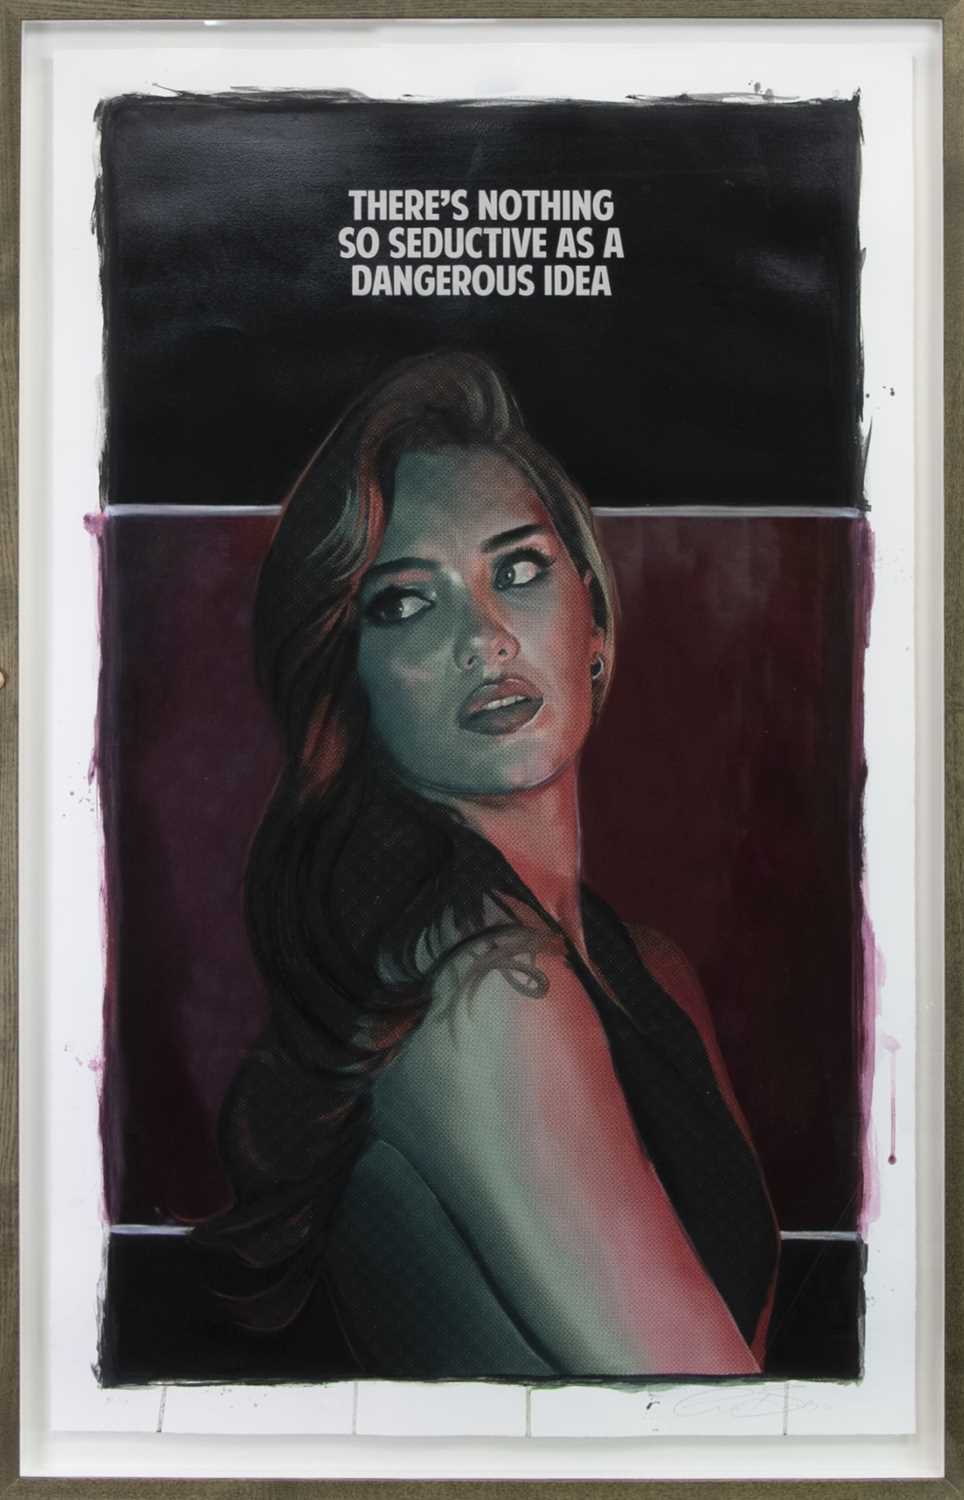 Lot 676 - THERE'S NOTHING SO SEDUCTIVE AS A DANGEROUS IDEA, A PRINT BY THE CONNOR BROTHERS